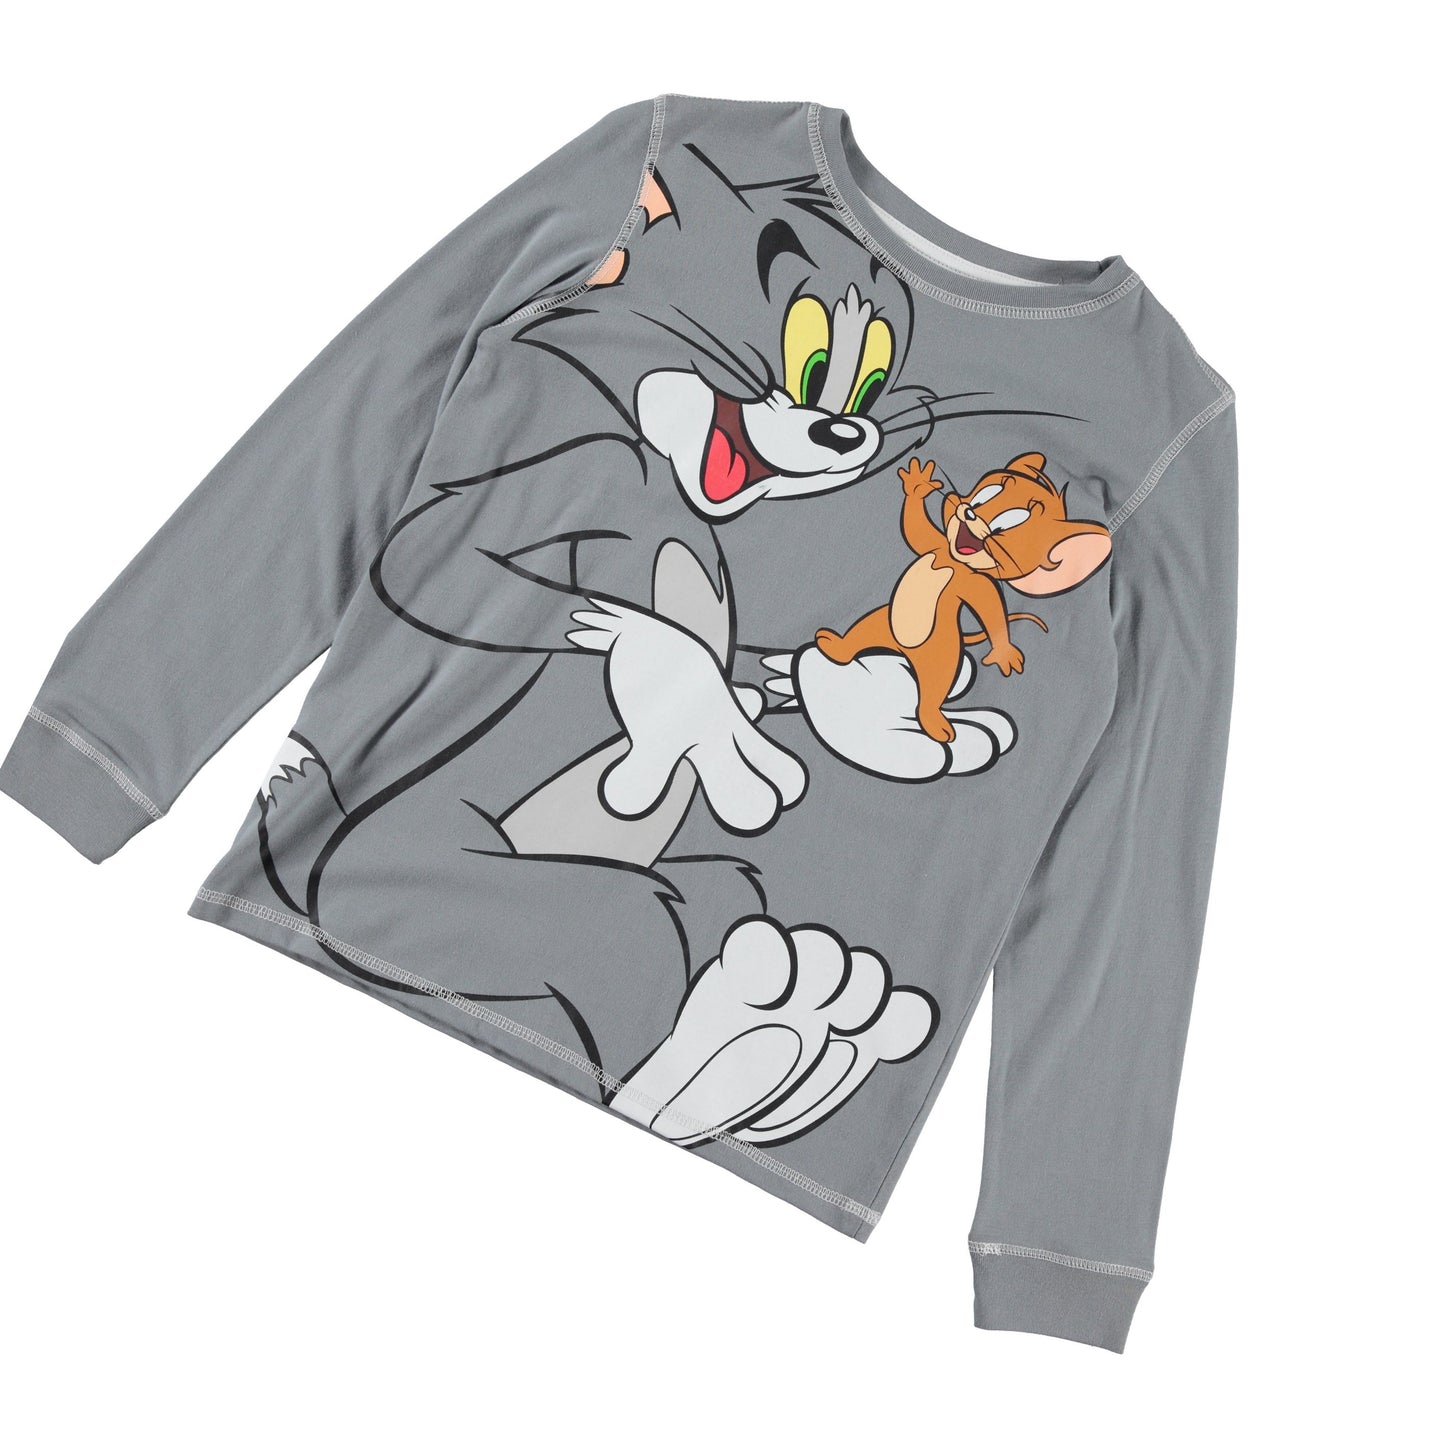 Boys Tom and Jerry Long Sleeve T-Shirt - Sizes 4-16